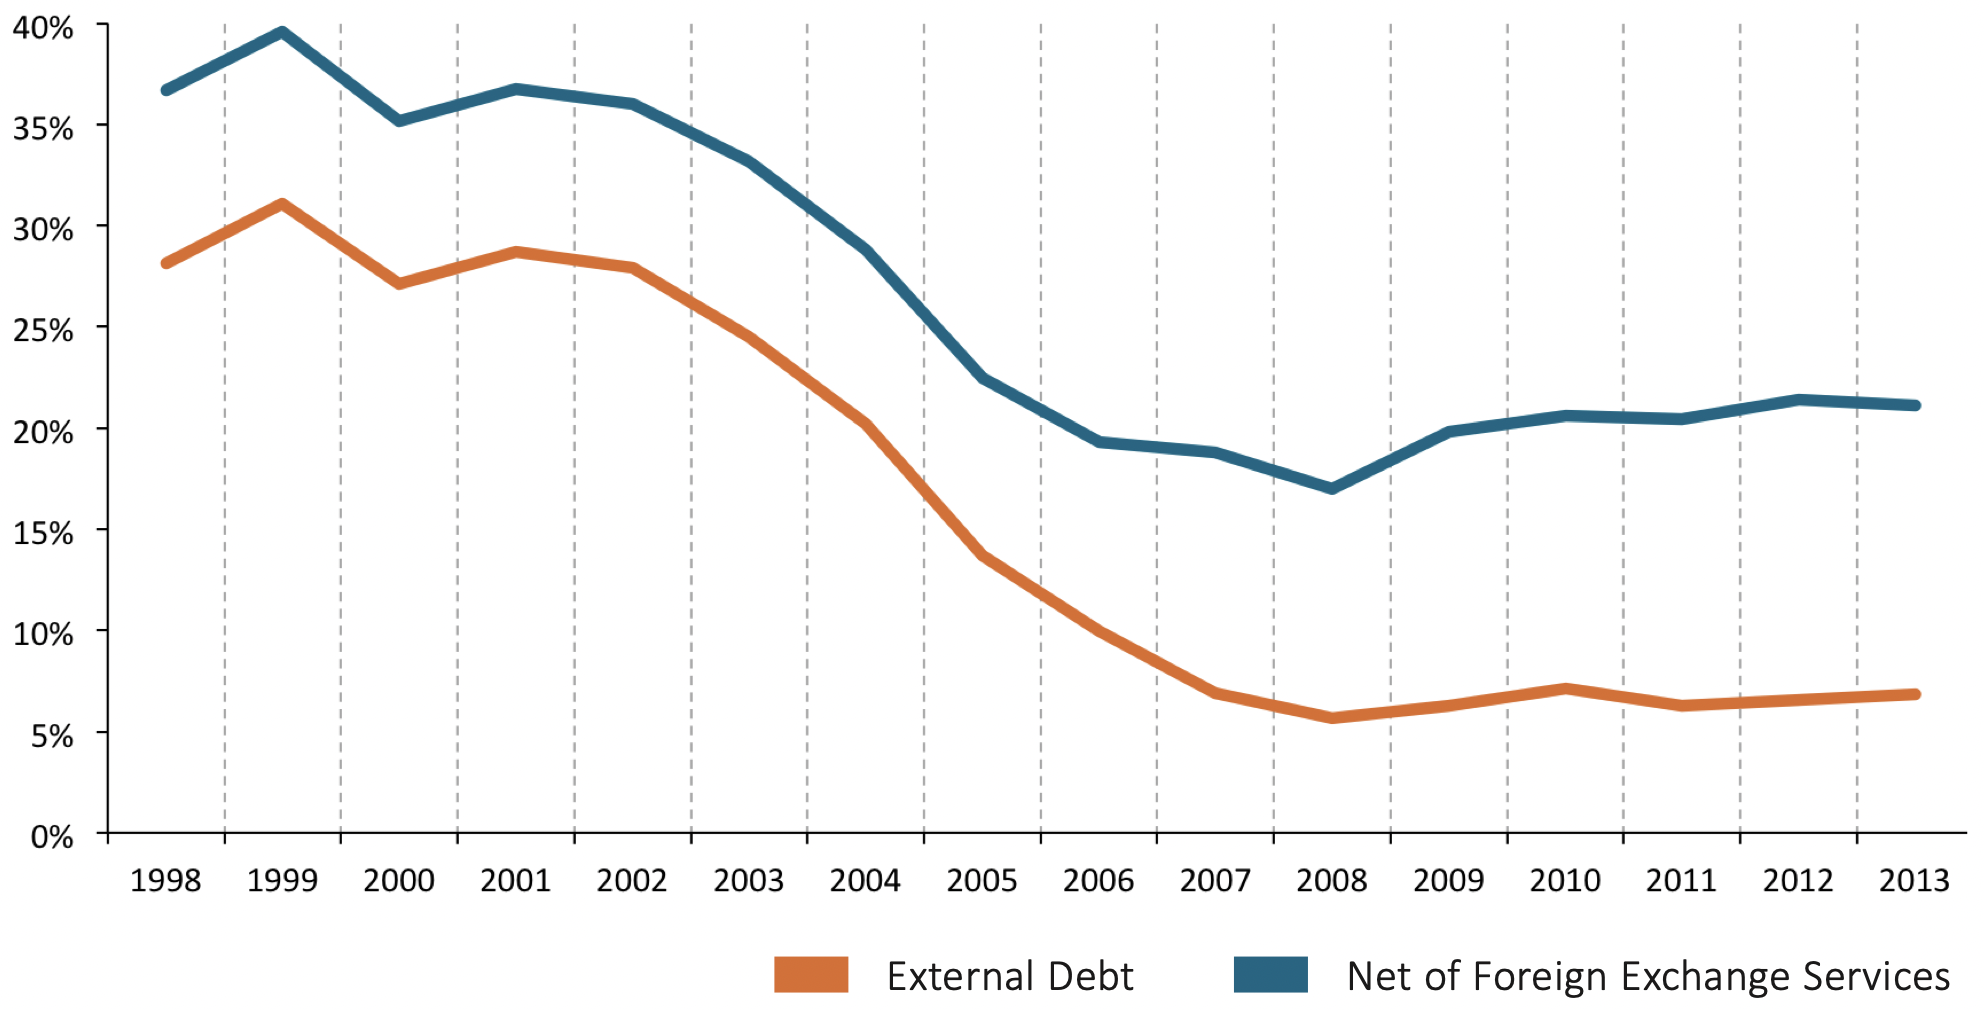 This graph compares external debt as a percentage of GDP over time.